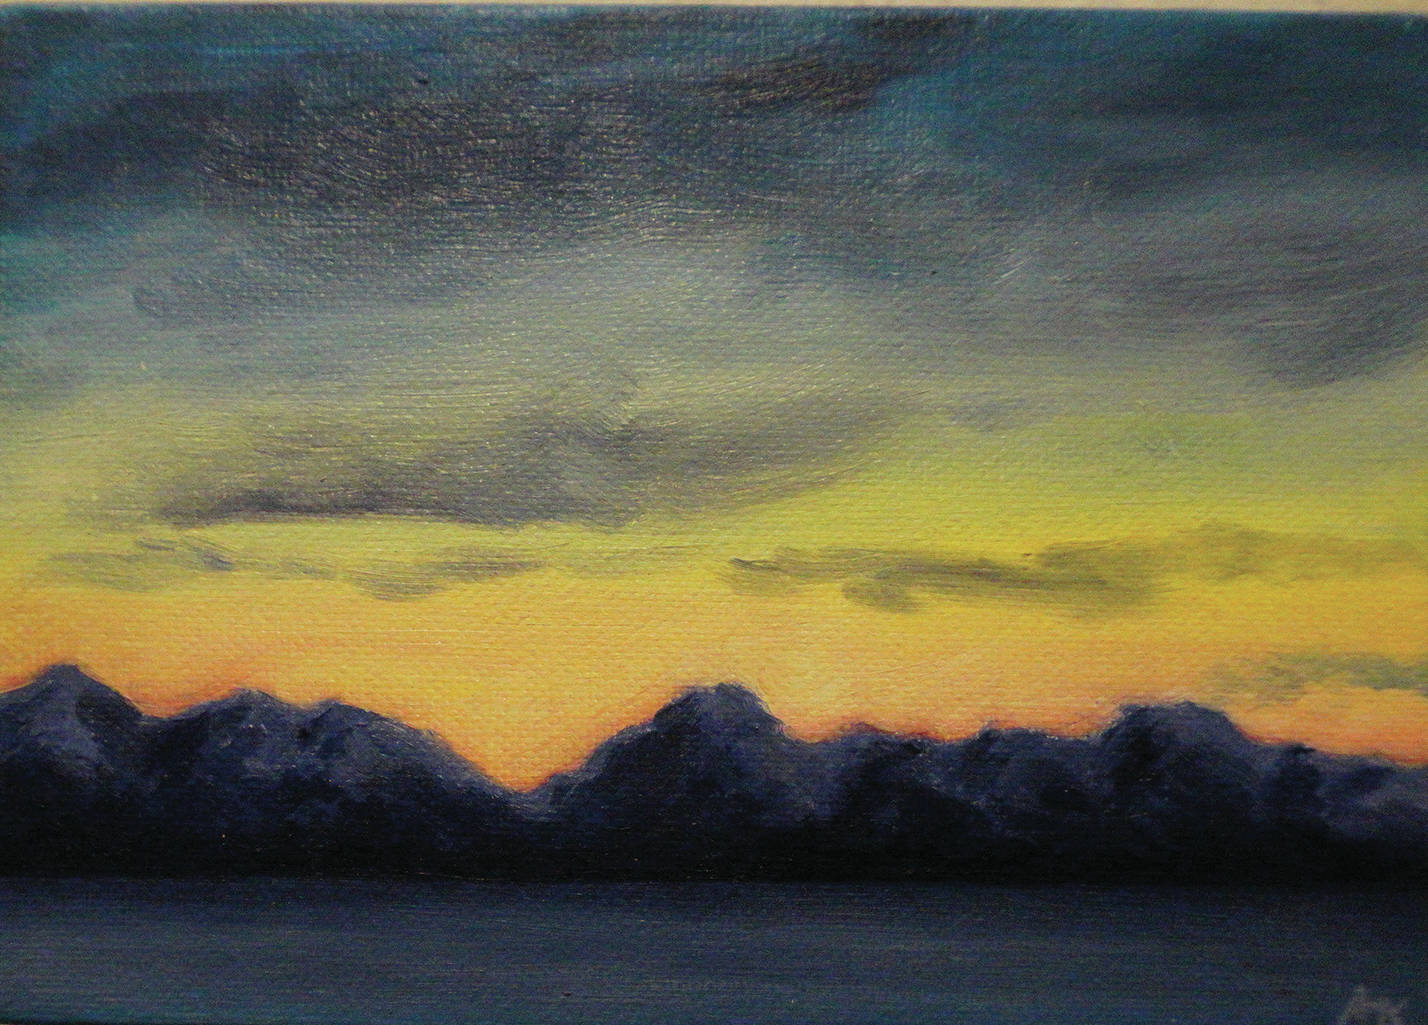 Amanda Kelly’s “Kachemak Bay Sunset” is one of the pieces in the 5x7 show at the Homer Council on the Arts that opened on Nov. 1, 2019, in Homer, Alaska. (Photo by Michael Armstrong/Homer News)